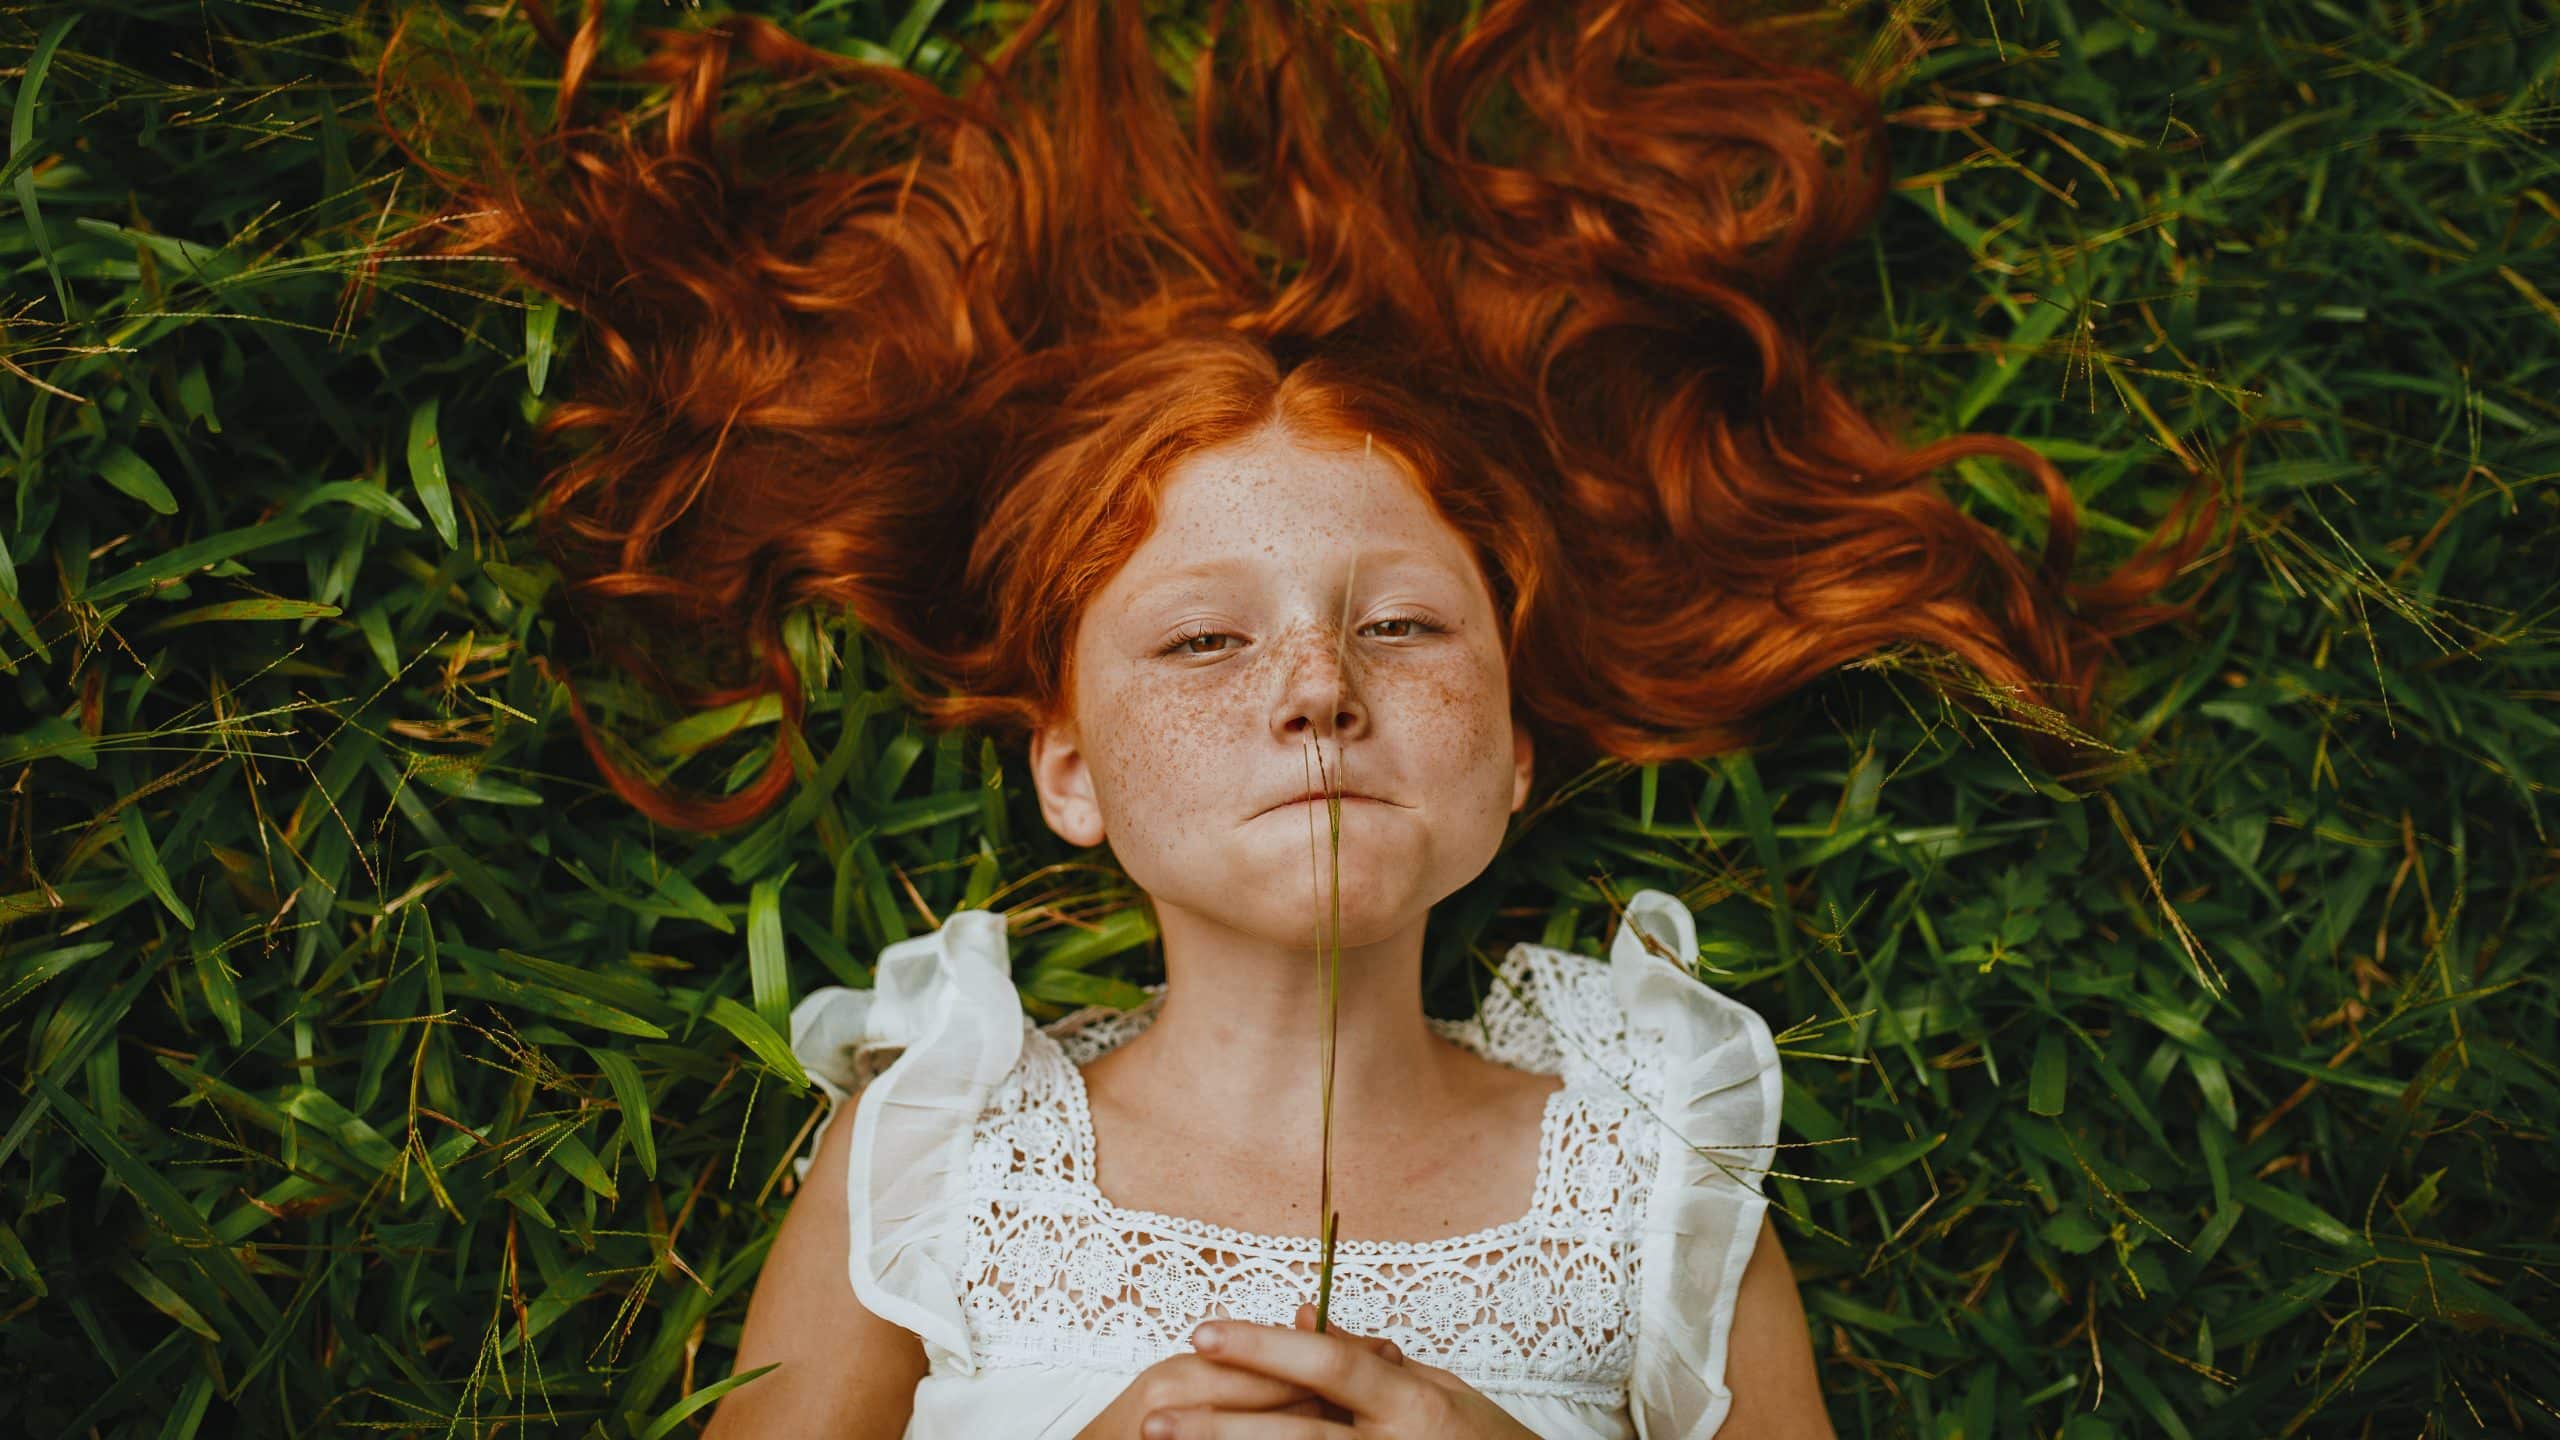 An image of a kid with long red hair lying on grass